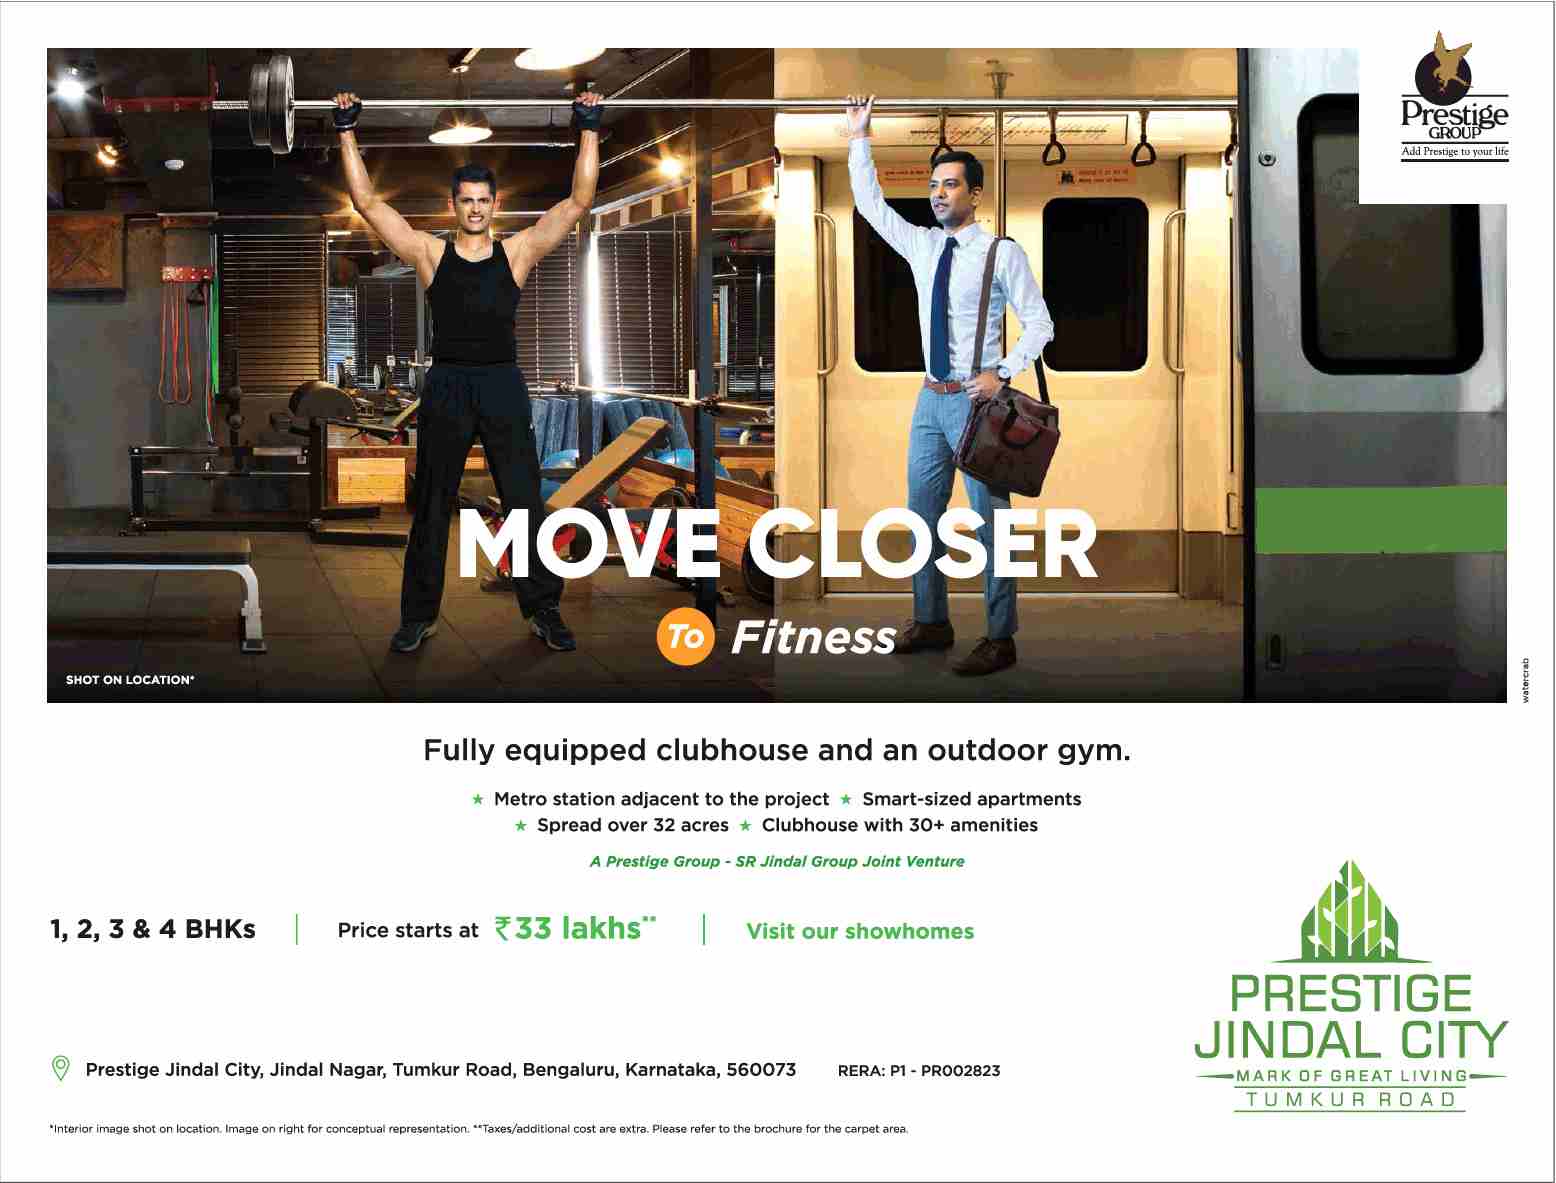 Move closer to fitness with fully equipped clubhouse &  outdoor gym at Prestige Jindal City in Bangalore